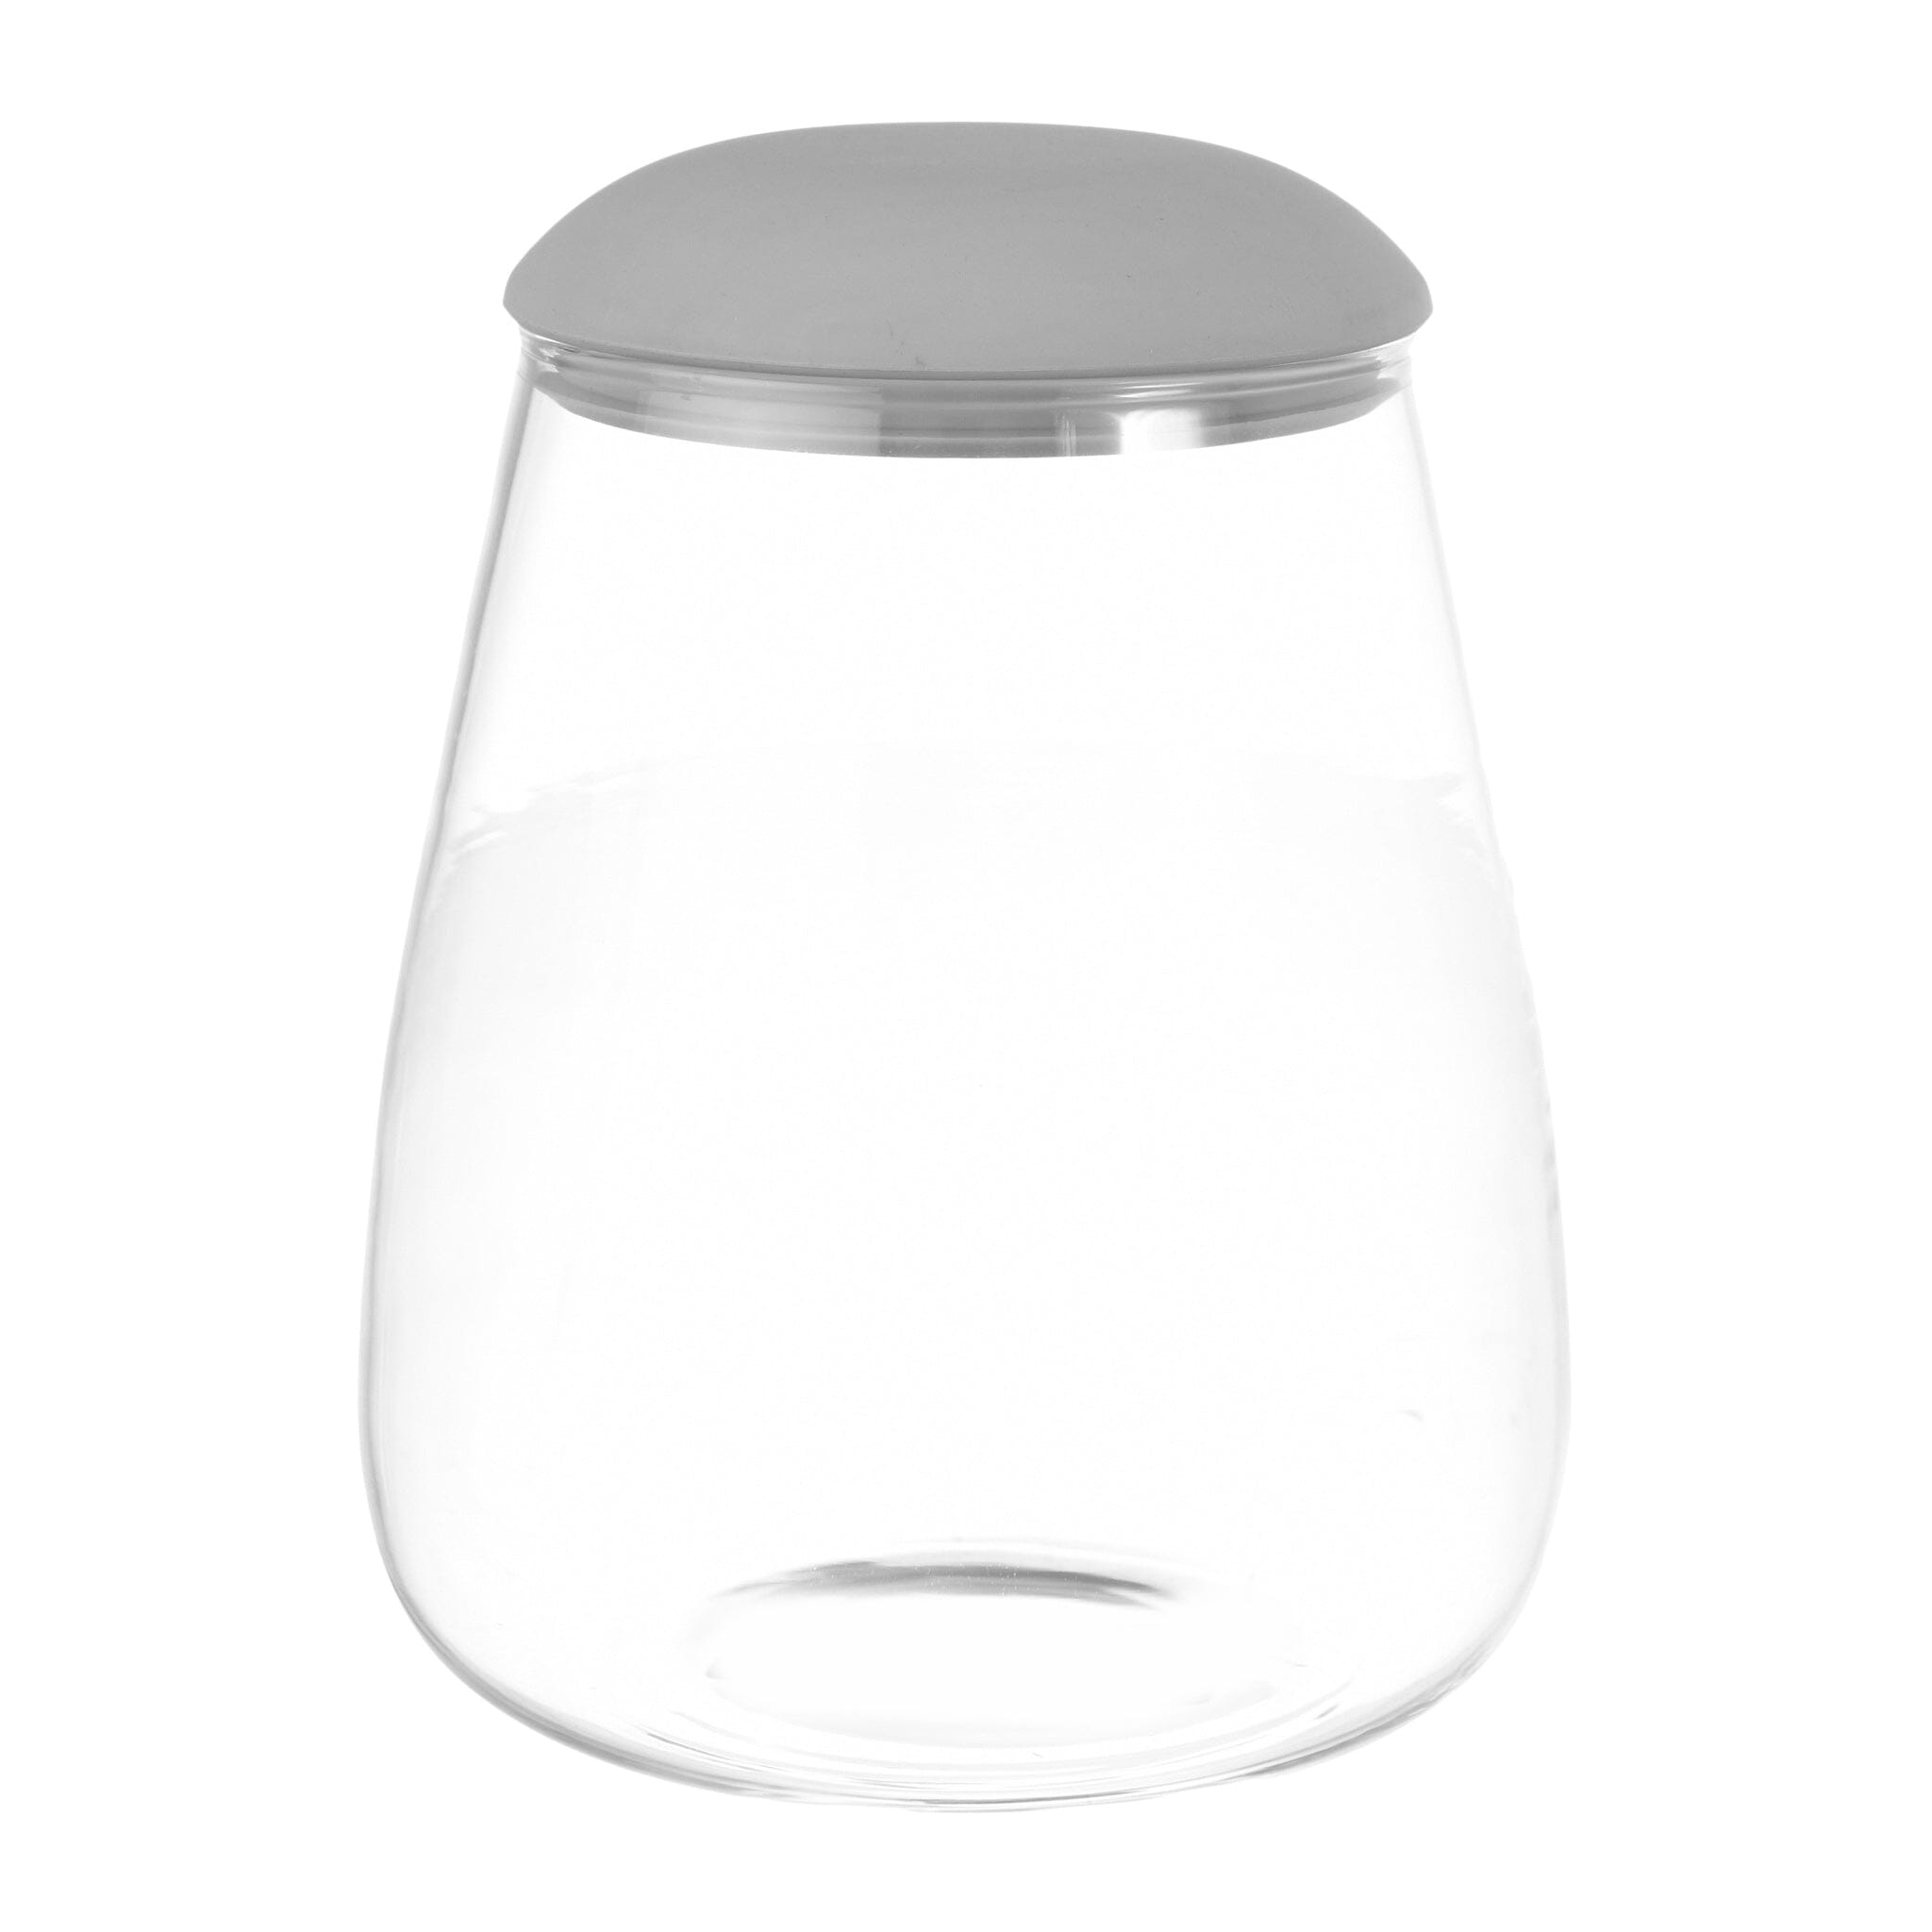 O'lala - Glass Jar with Silicone Cover - Grey - 8x14cm - 520008160